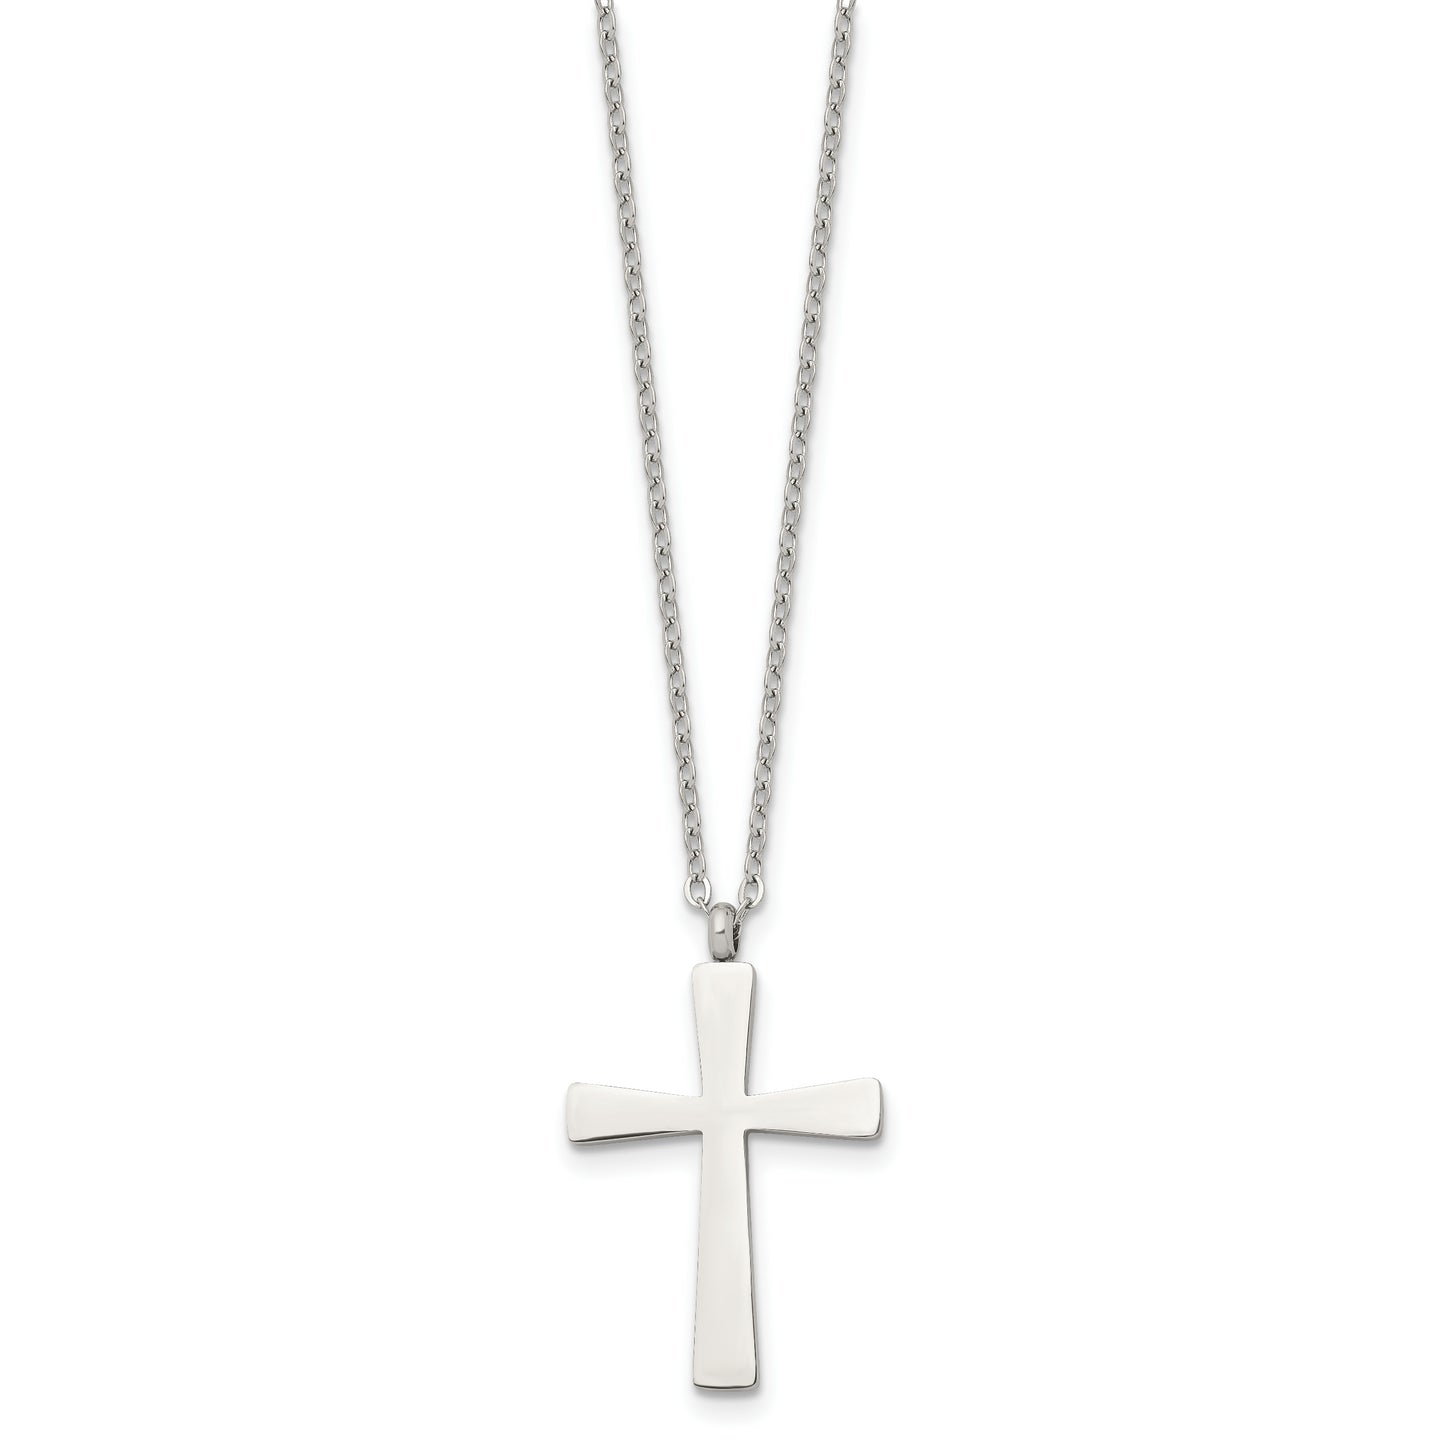 Chisel Stainless Steel Polished Large Cross Pendant on a 18 inch Cable Chain Necklace